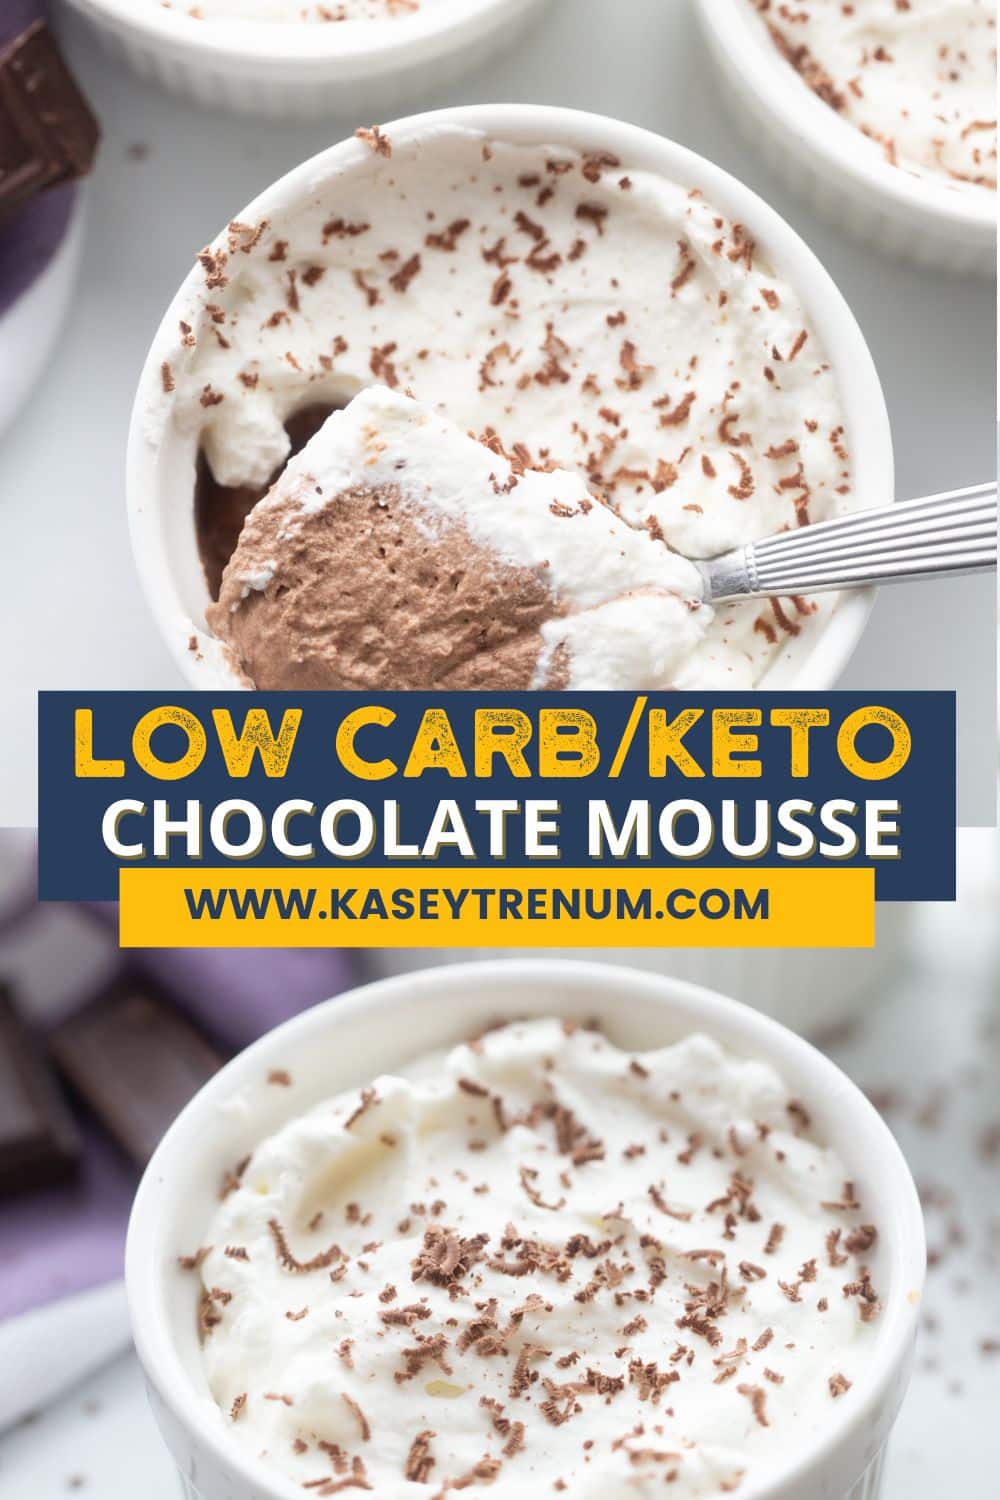 Collage image of keto chocolate mousse served in white ramekins with blue banner and yellow and white lettering